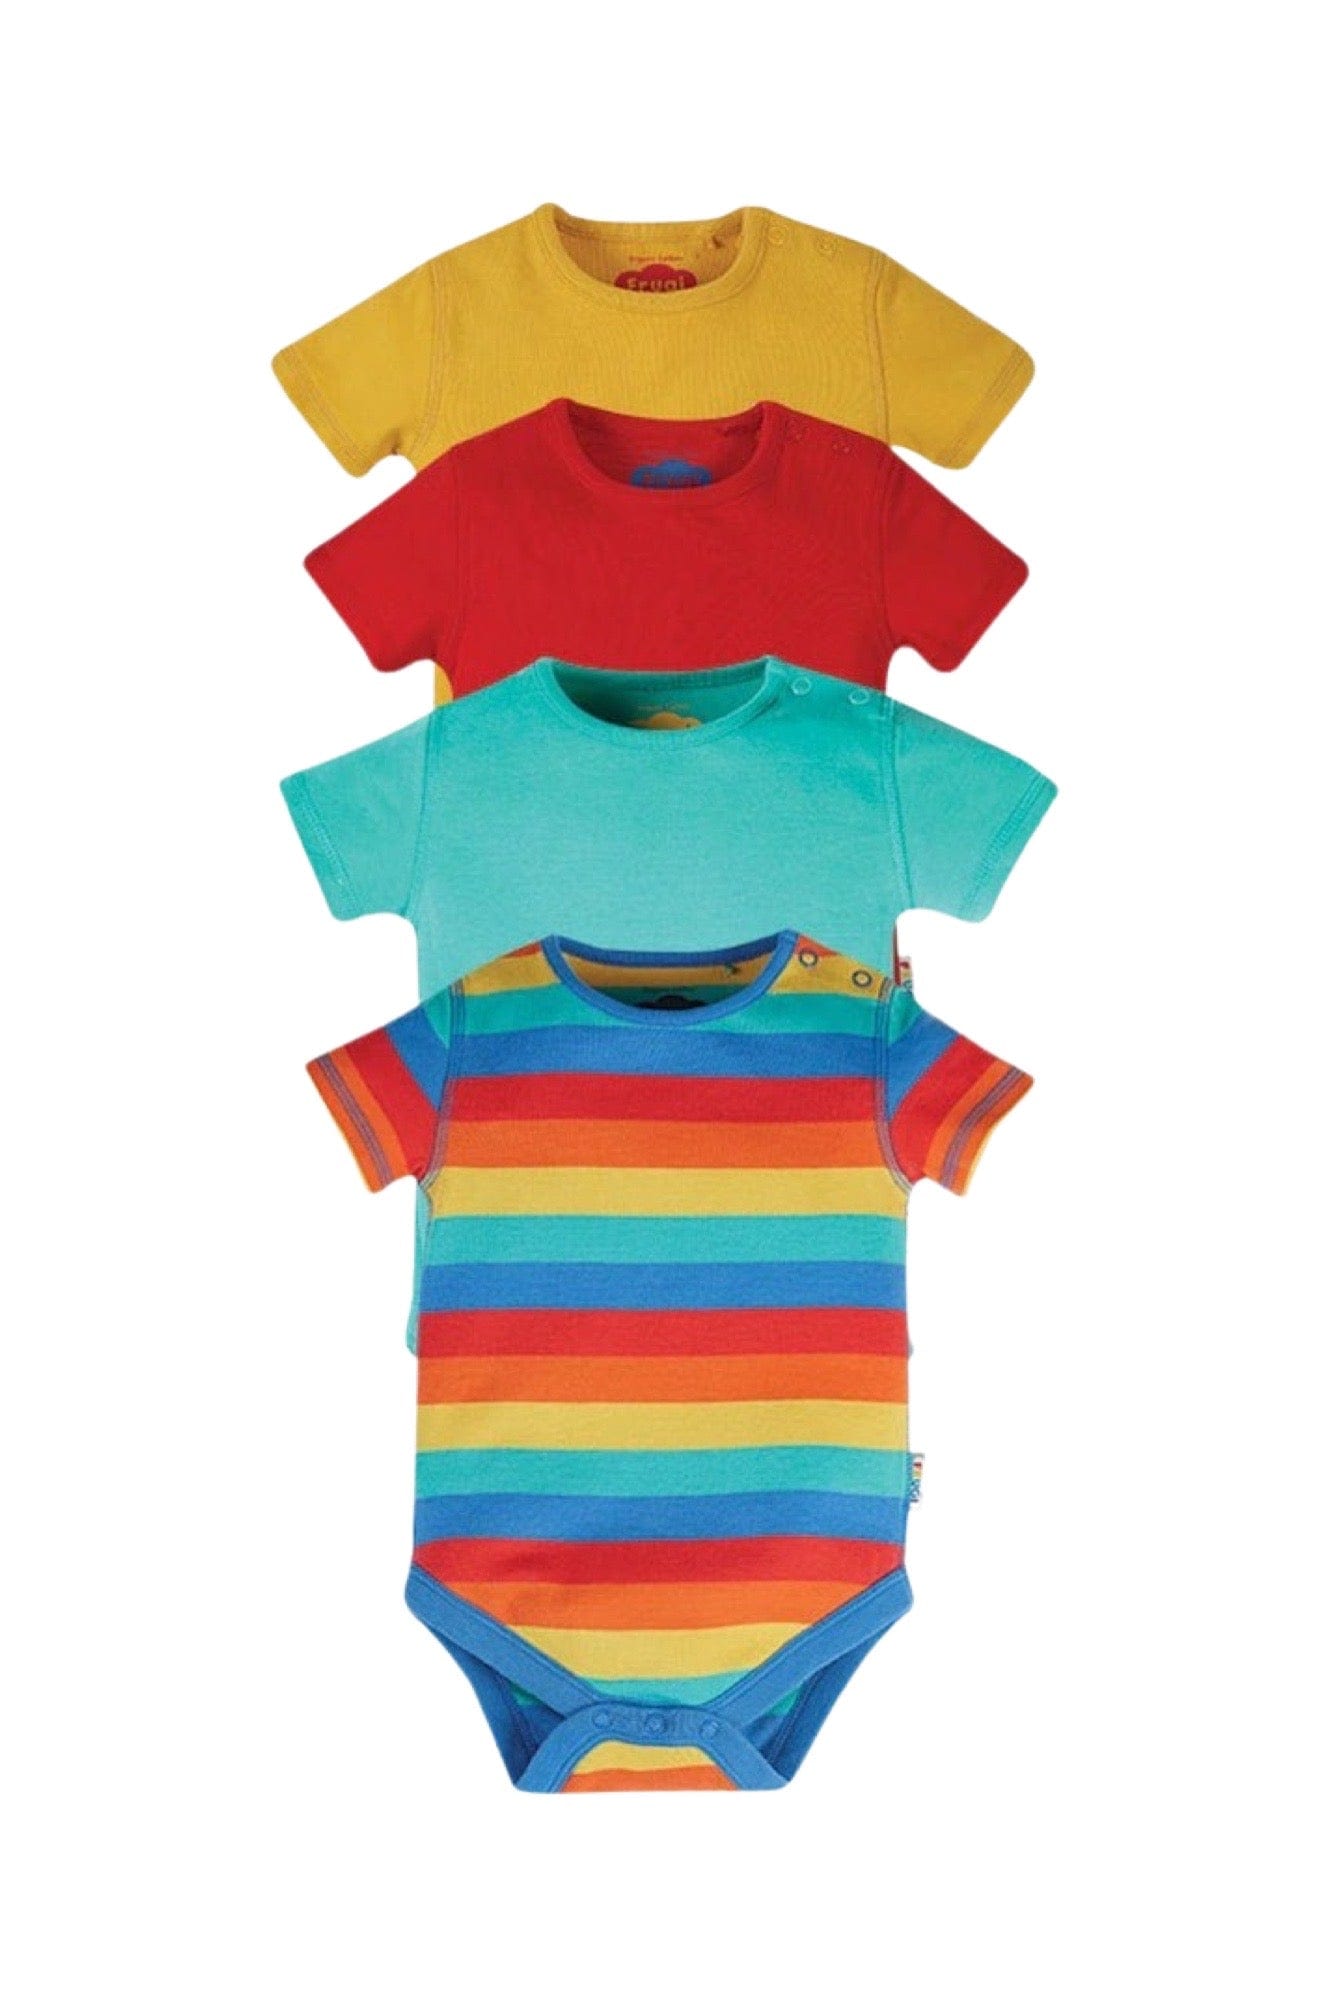 Over The Rainbow Bodysuits 4 Pack